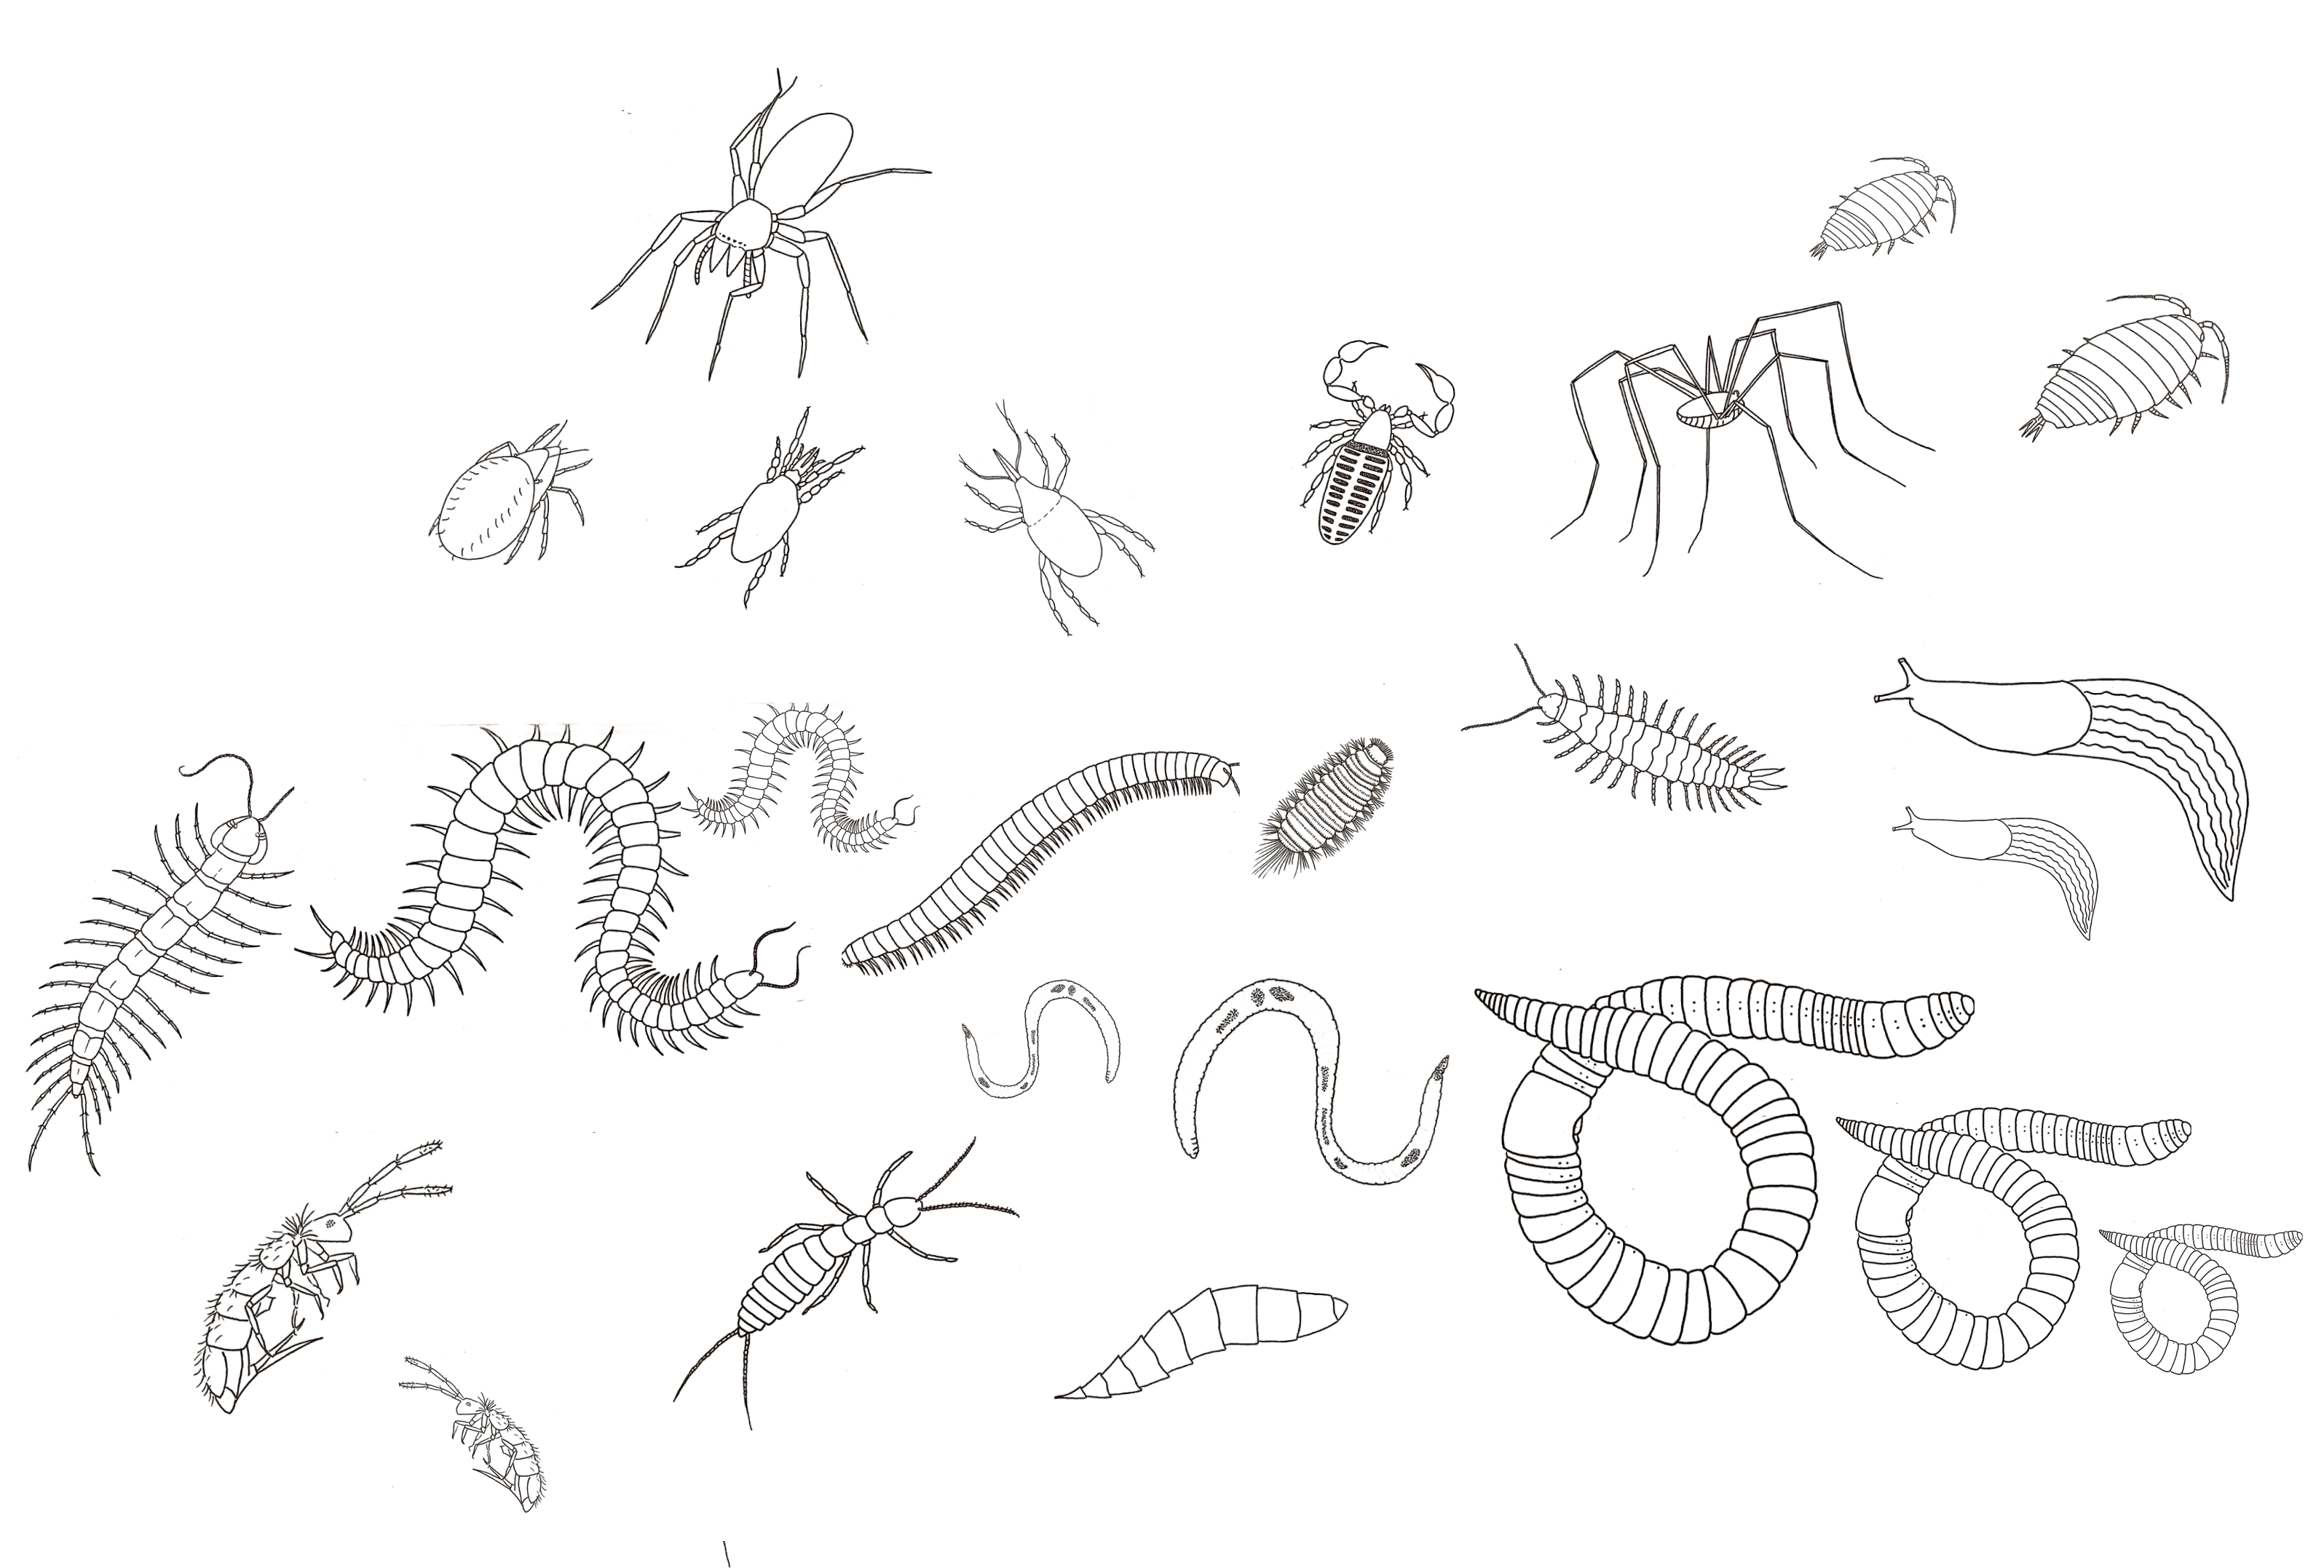 Line drawings of a variety of soil animals. Many of them have segmented bodies and jointed appendages.